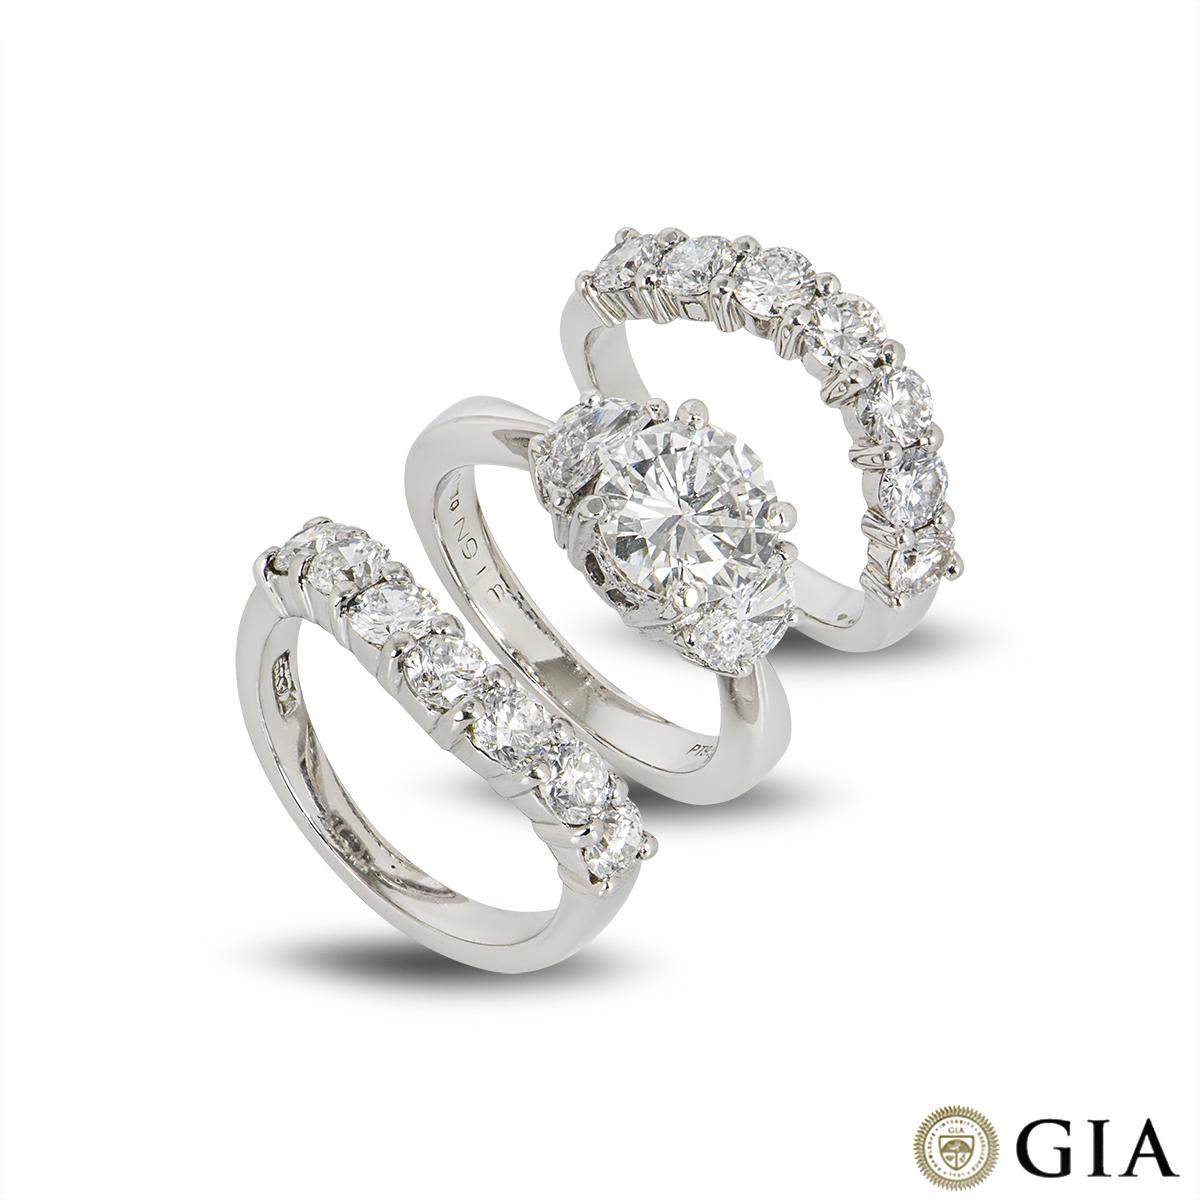 GIA Certified Platinum Diamond Engagement Ring and Bridal Set 1.55ct I/VS2 For Sale 1